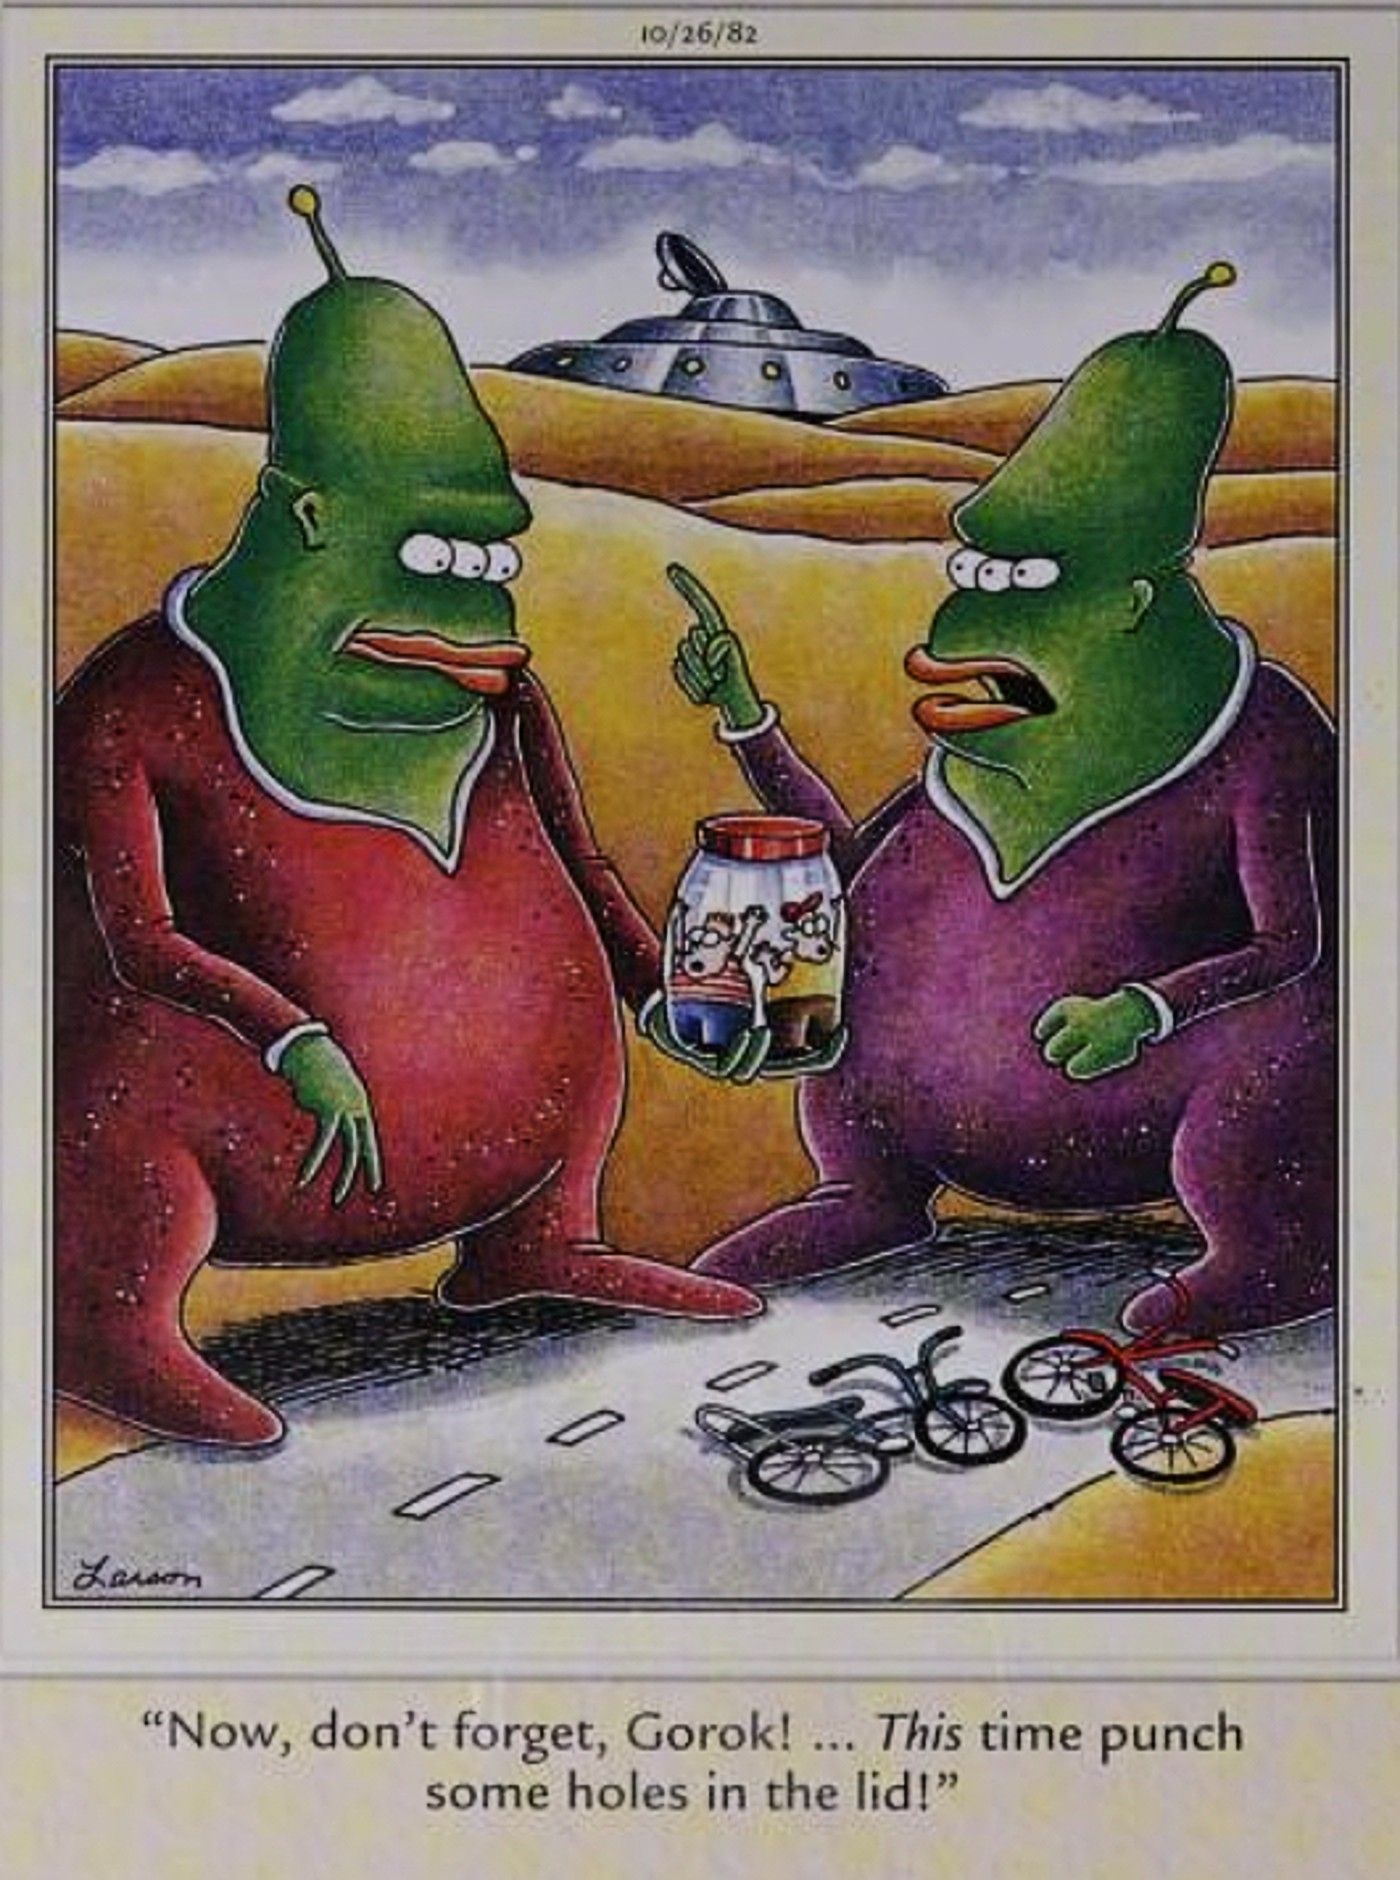 Far Side, alien reminds another alien to poke holes in the jar for their captive humans